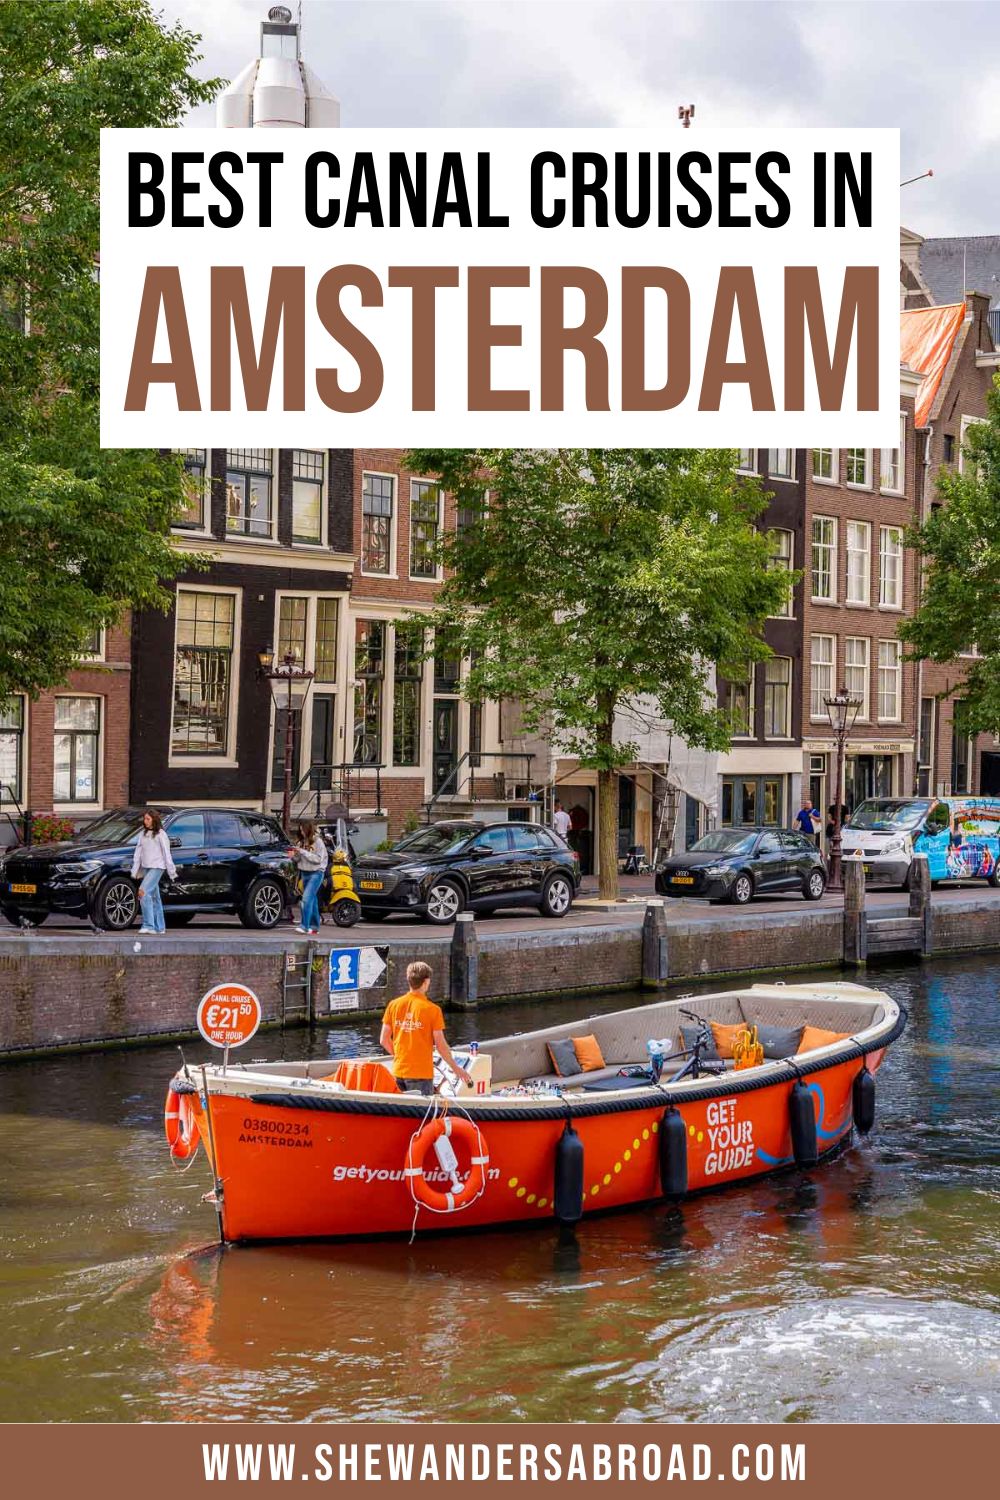 16 Best Canal Cruises in Amsterdam You Can't Go Wrong With